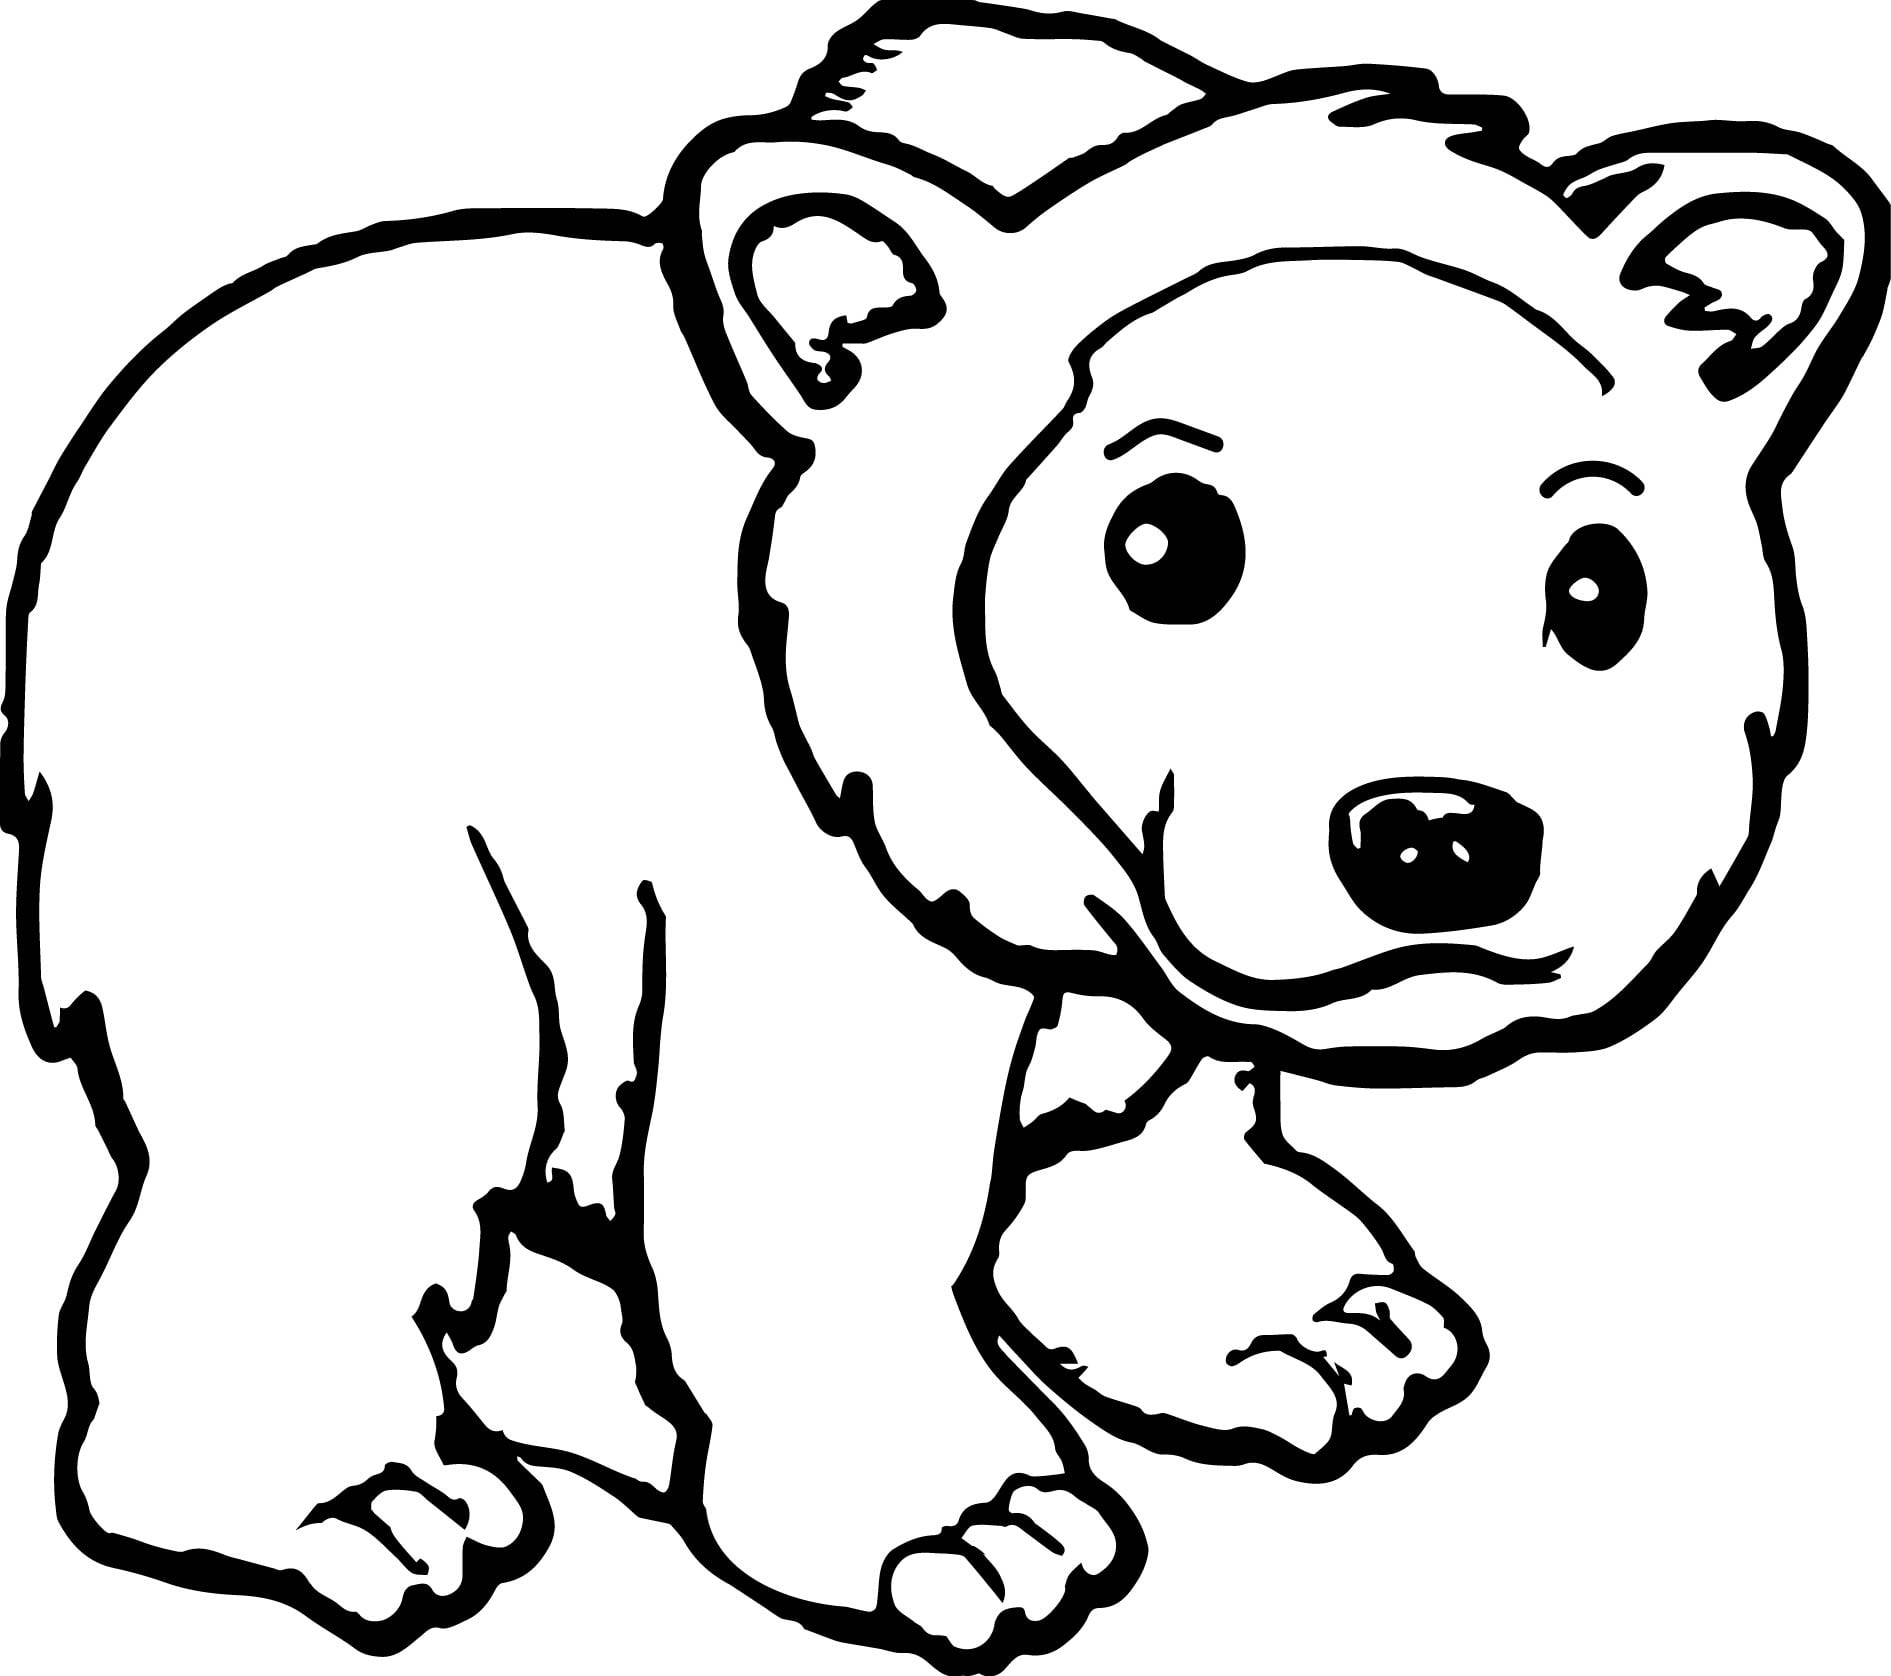 A Illustration Of A Cute Grizzly Brown Or Kodiak Bear Coloring Page